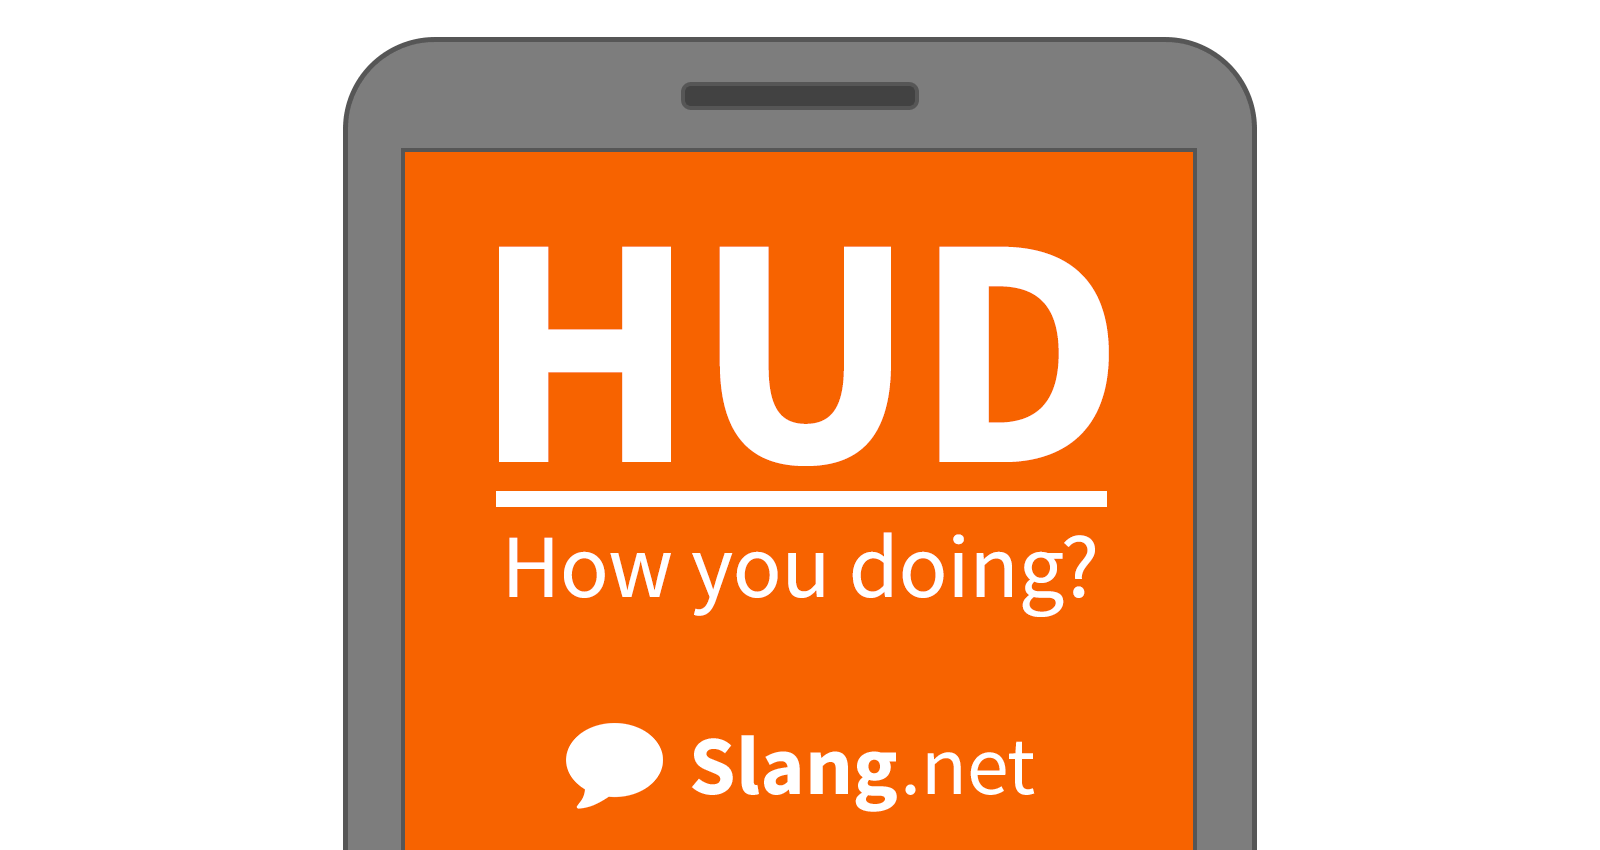 You will likely see HUD in messages online and in texts